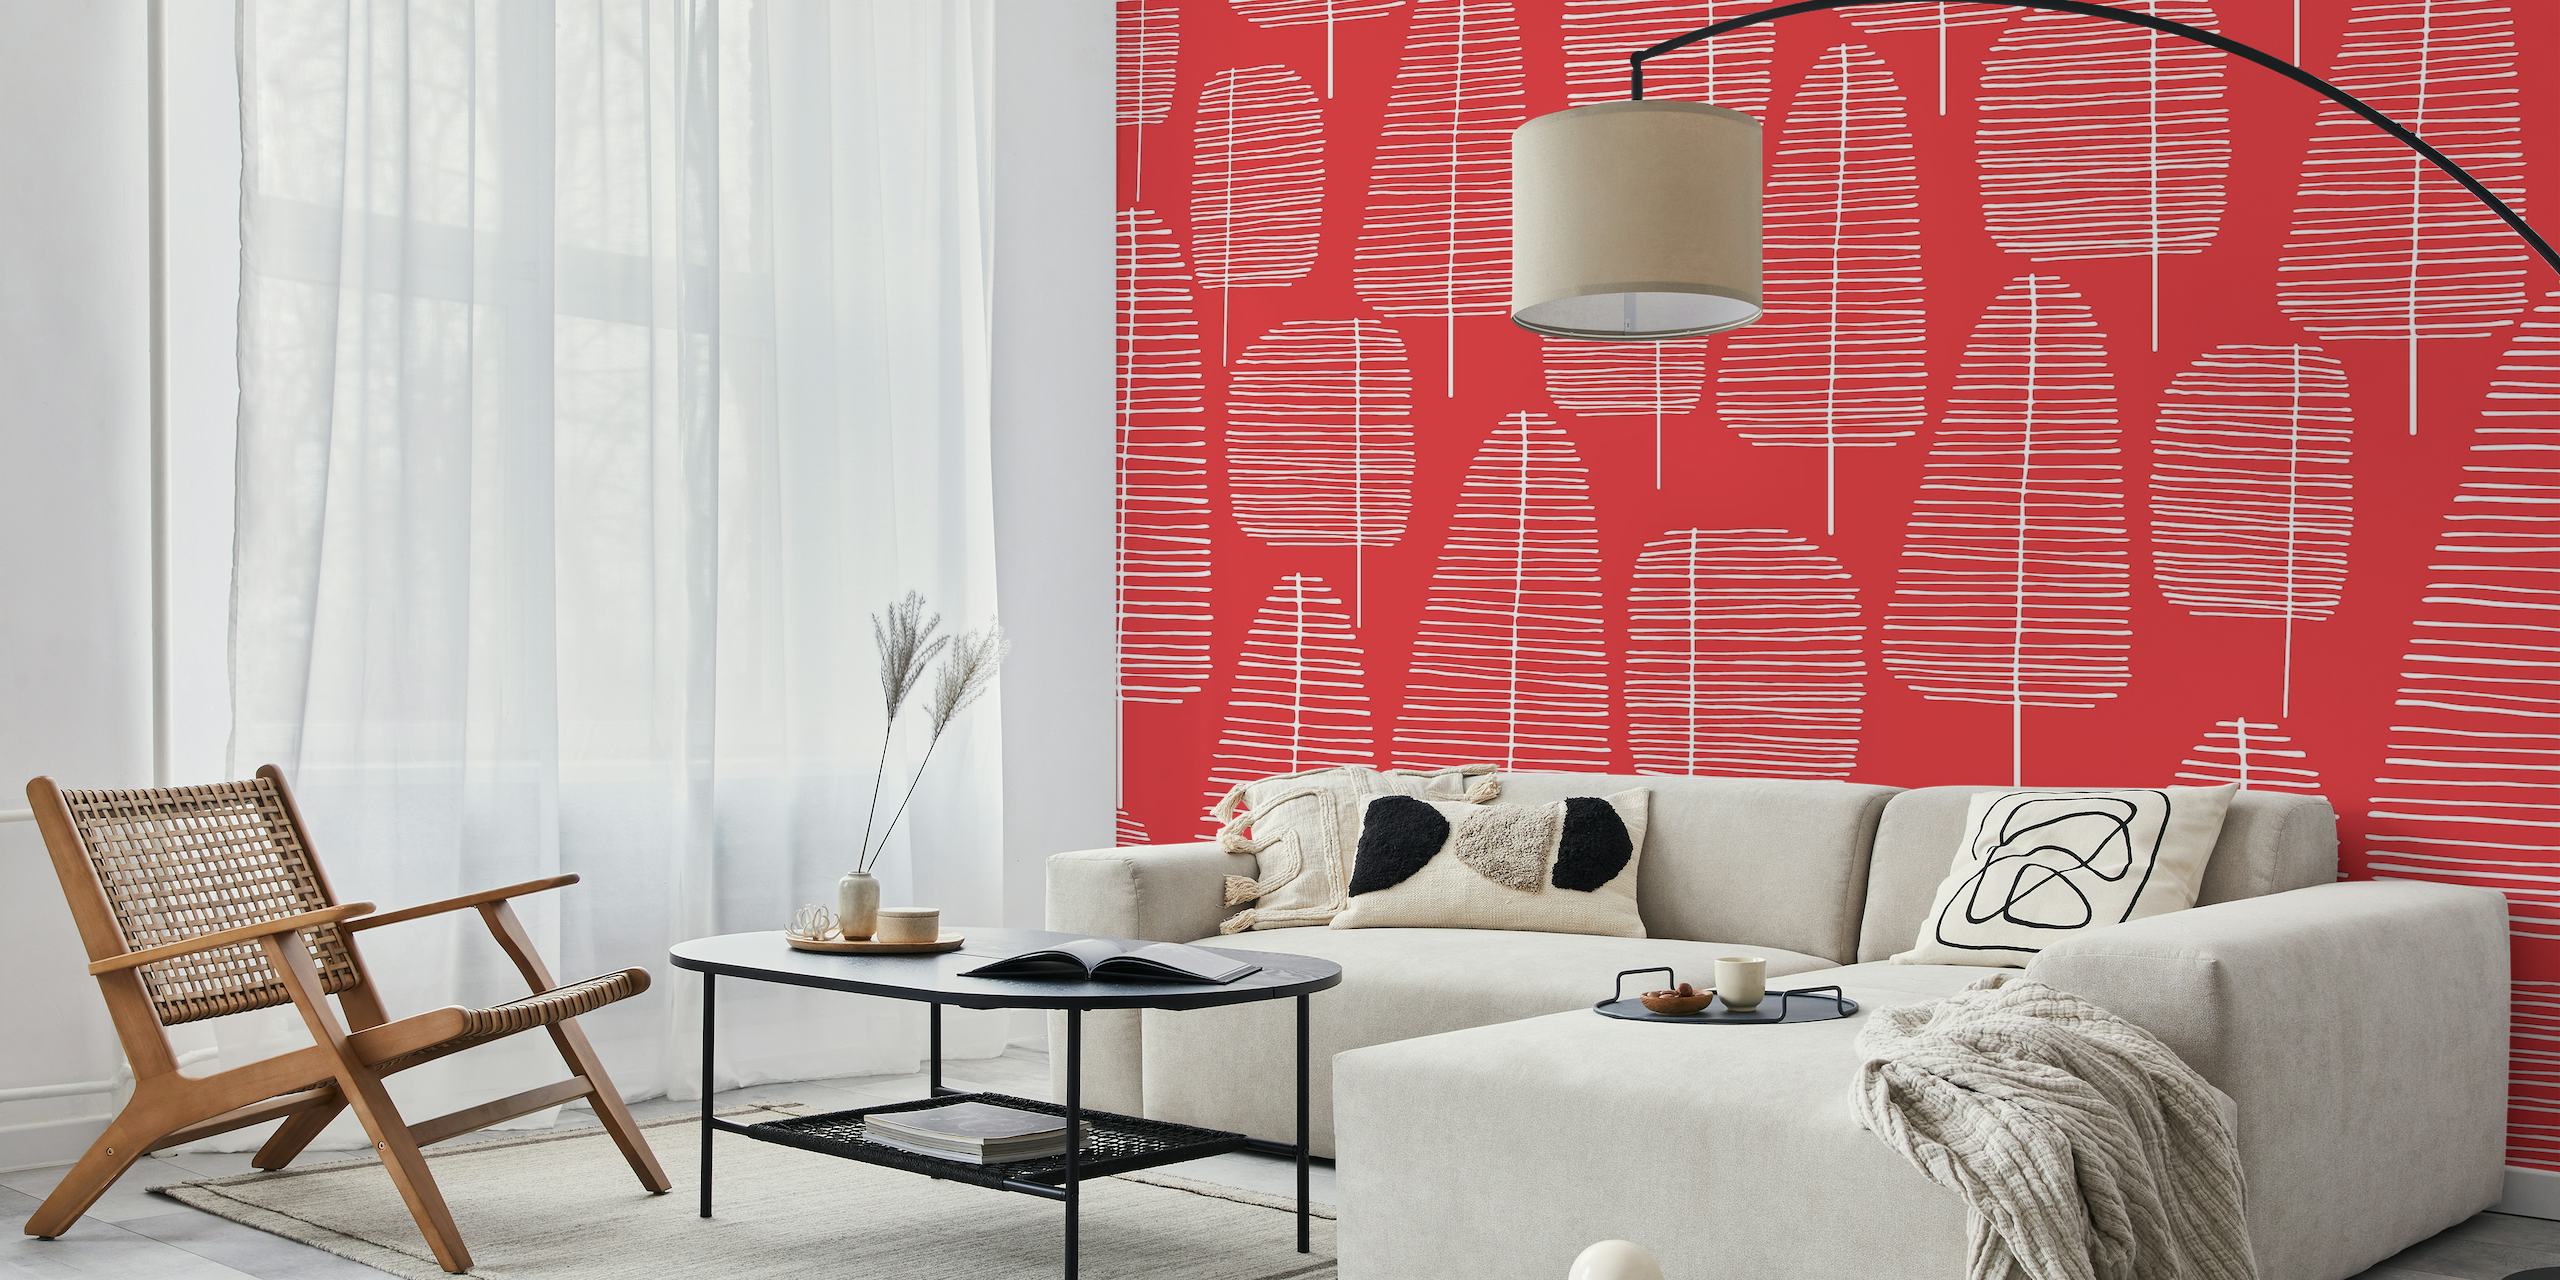 Mid Century Trees Red 2 wall mural with abstract tree shapes in red color